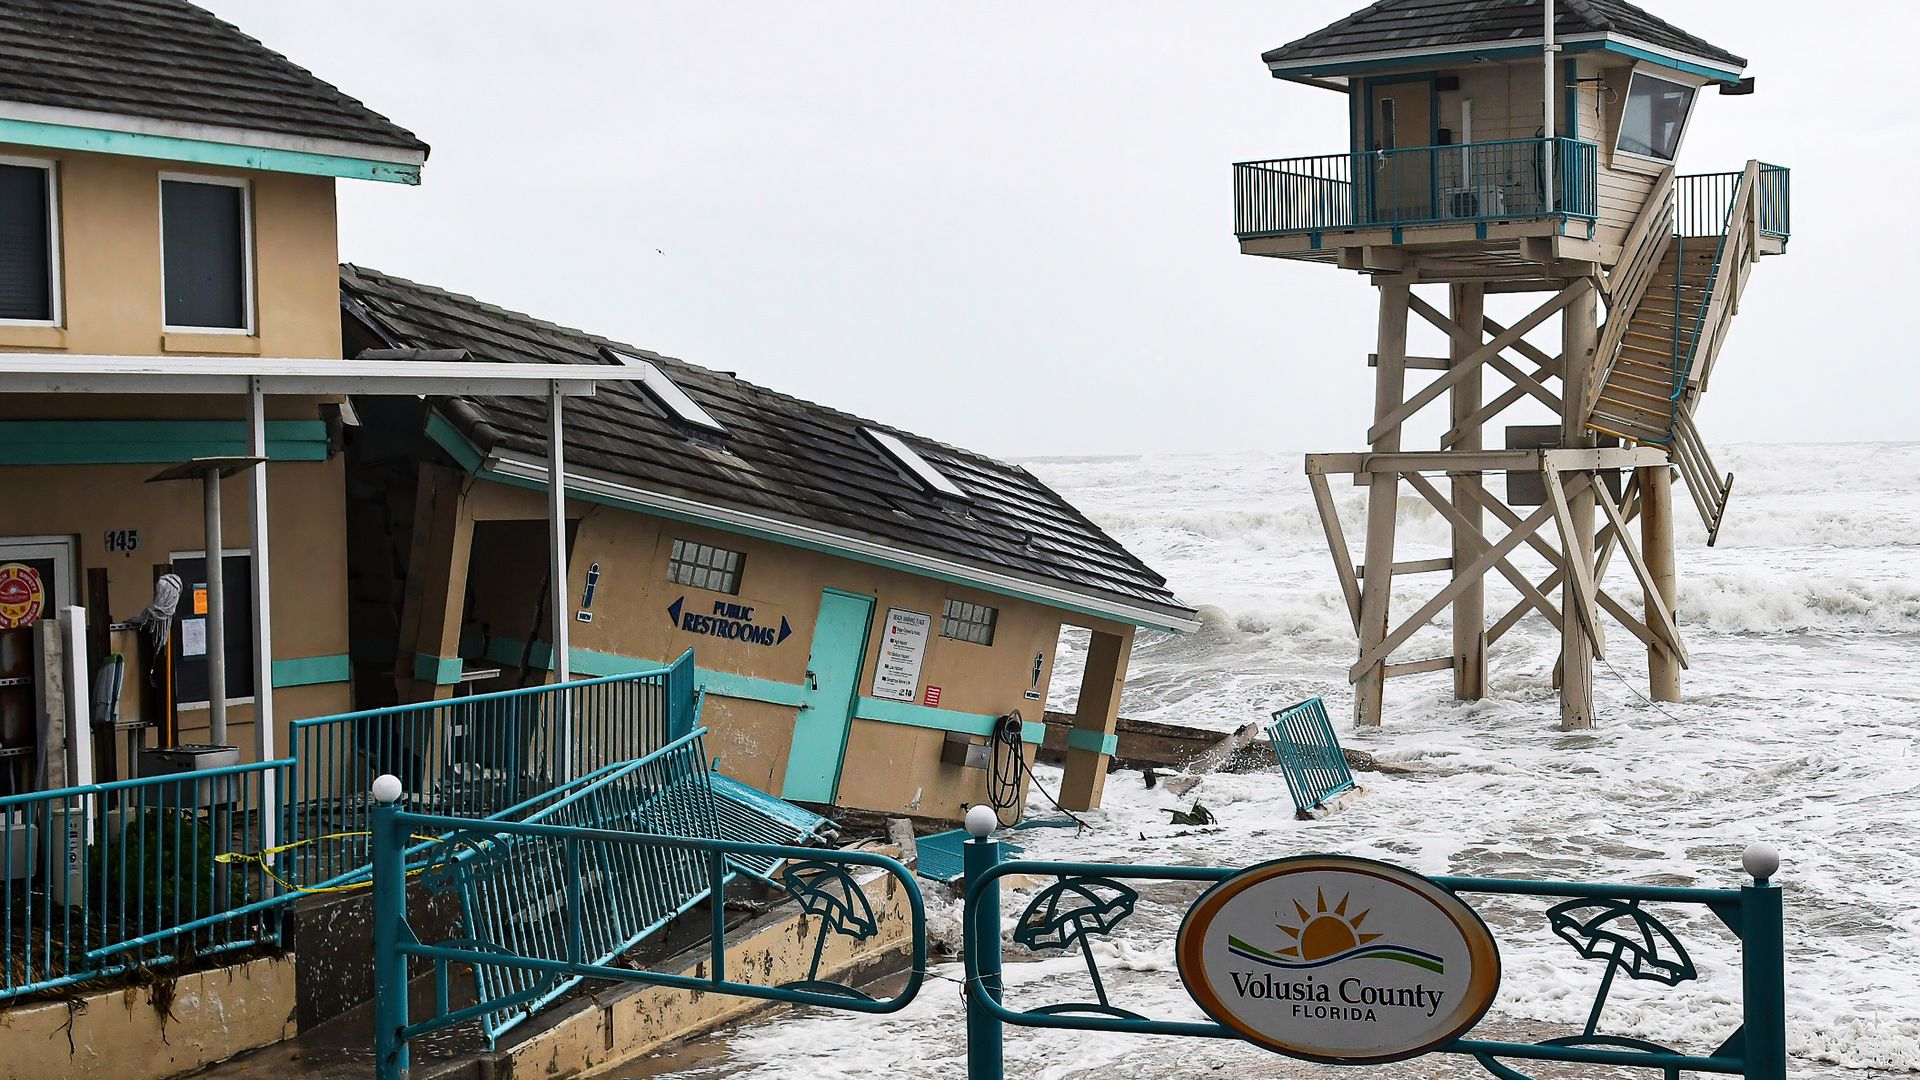 Waves crash near a damaged building and a lifeguard tower in Daytona Beach Shores in Florida, as tropical Storm Nicole approaches the coast.